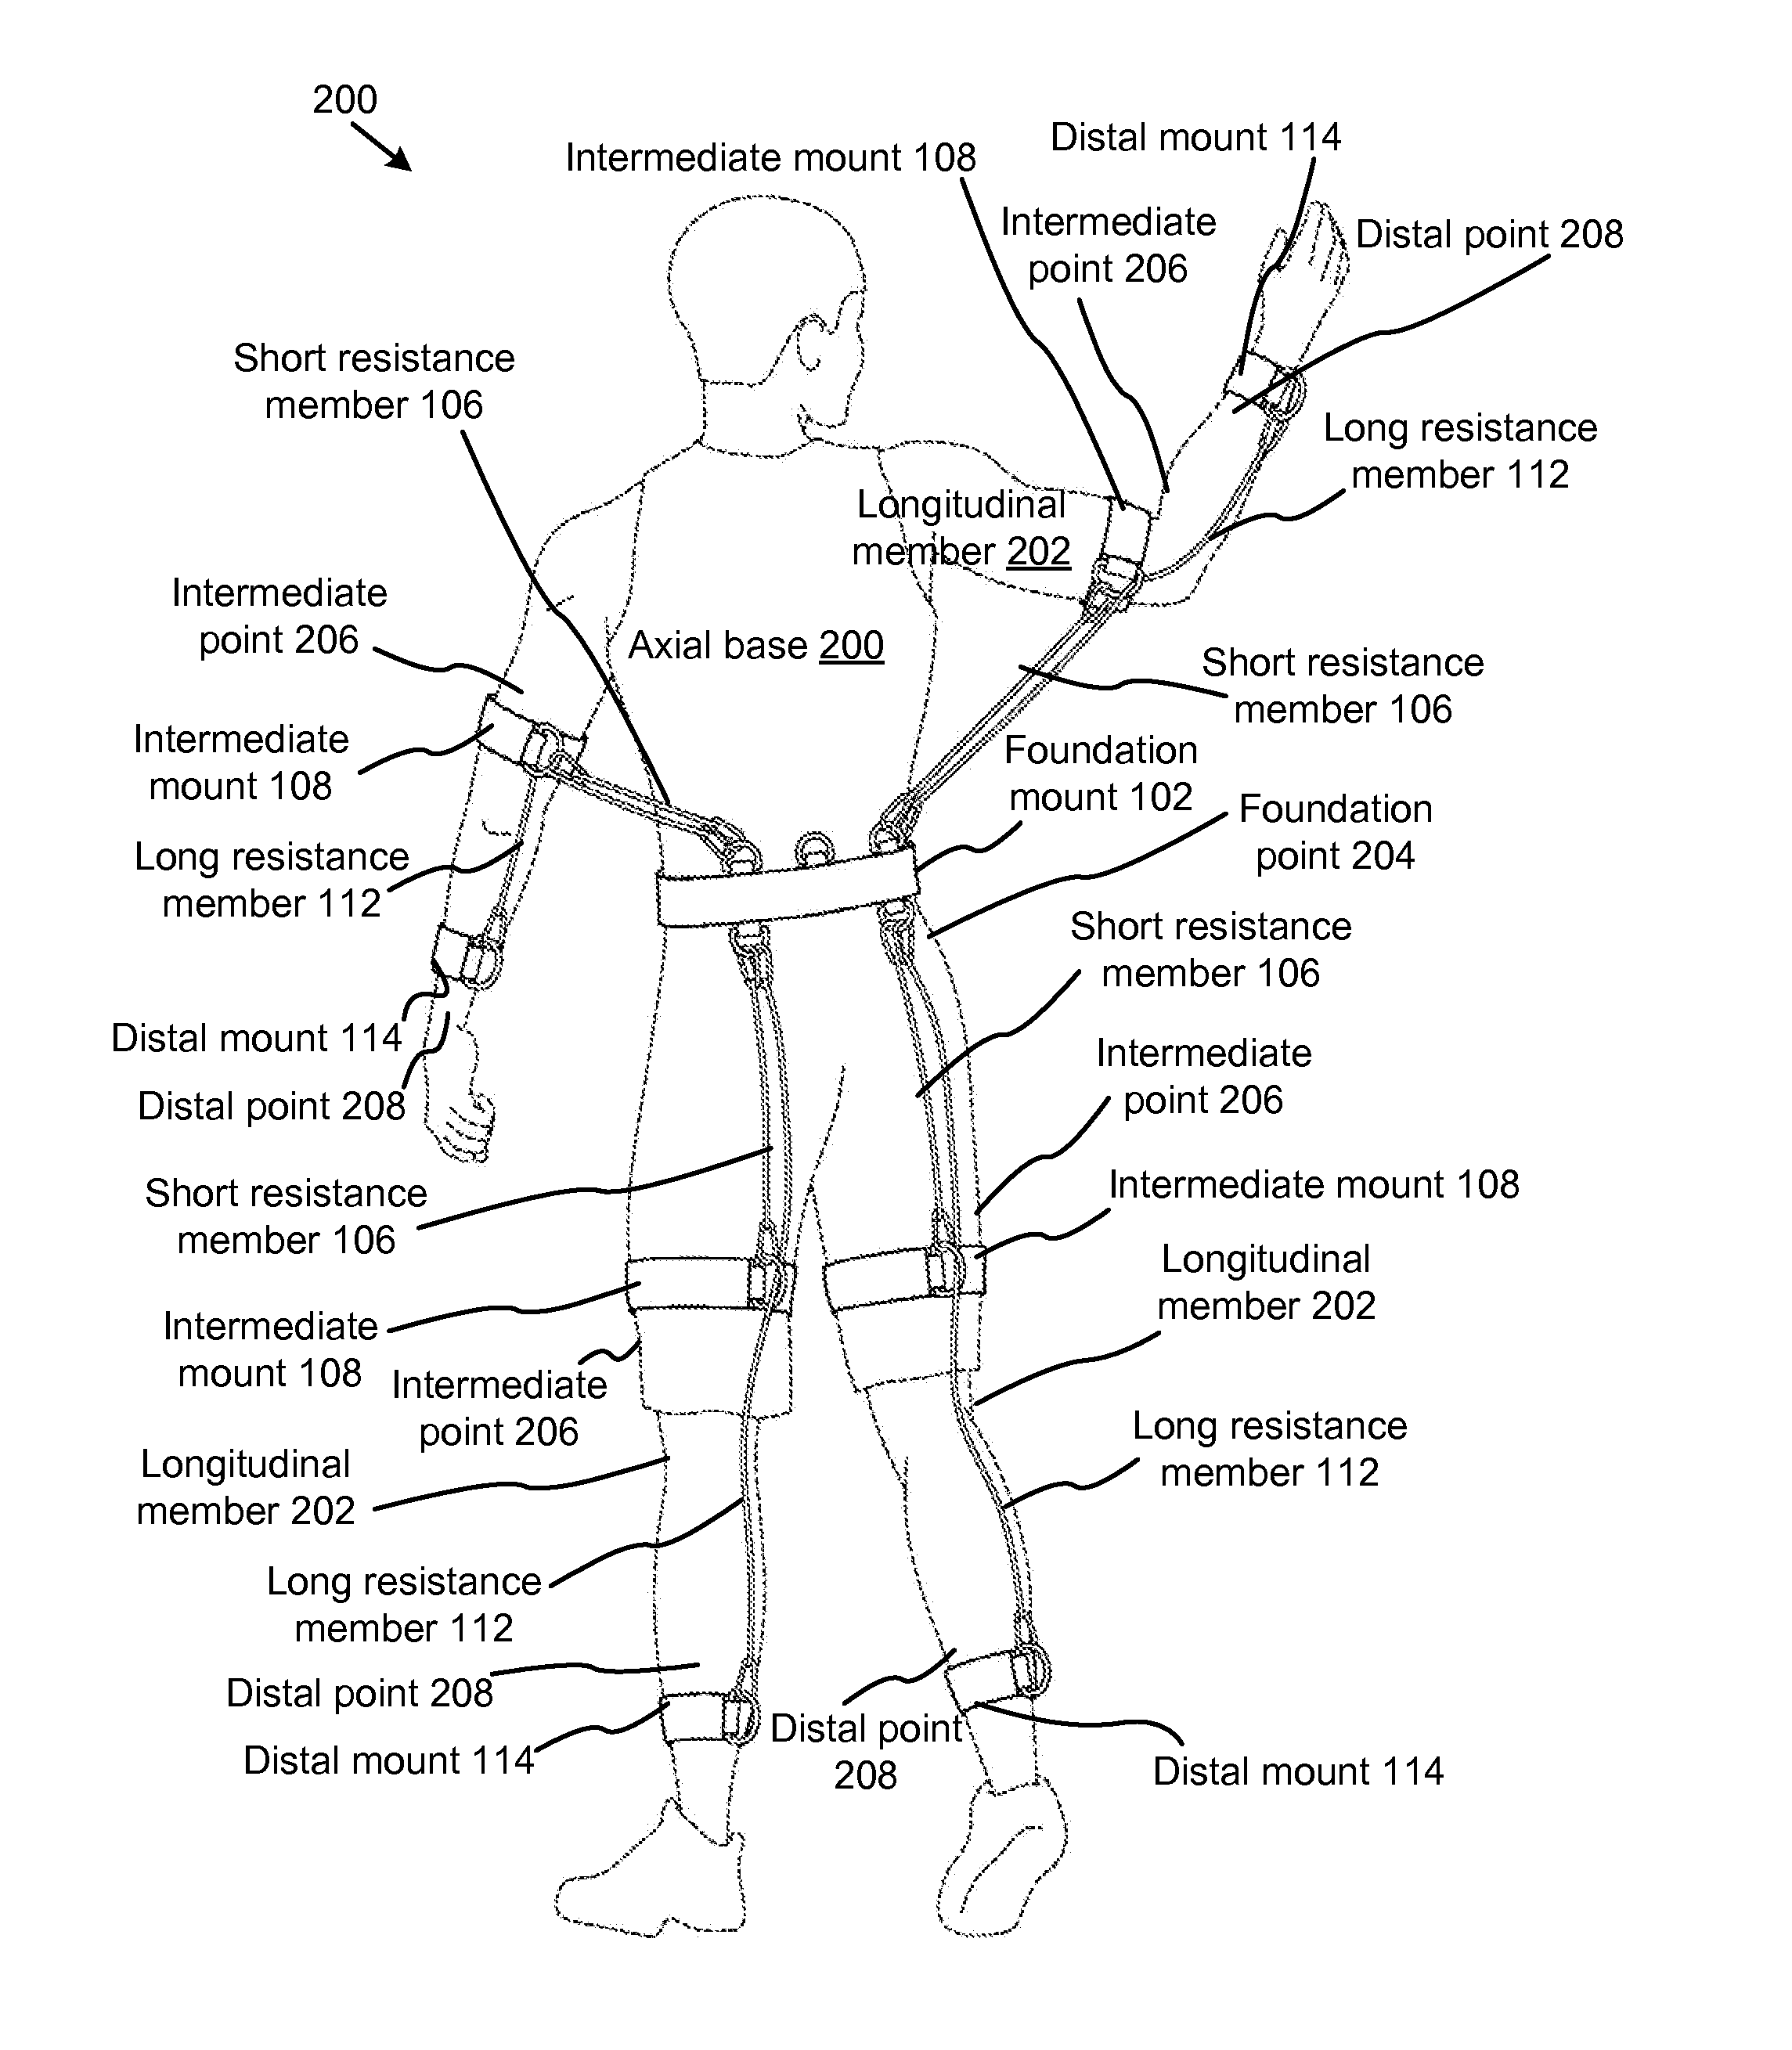 Resistance trainer having multiple interconnected body attachment points